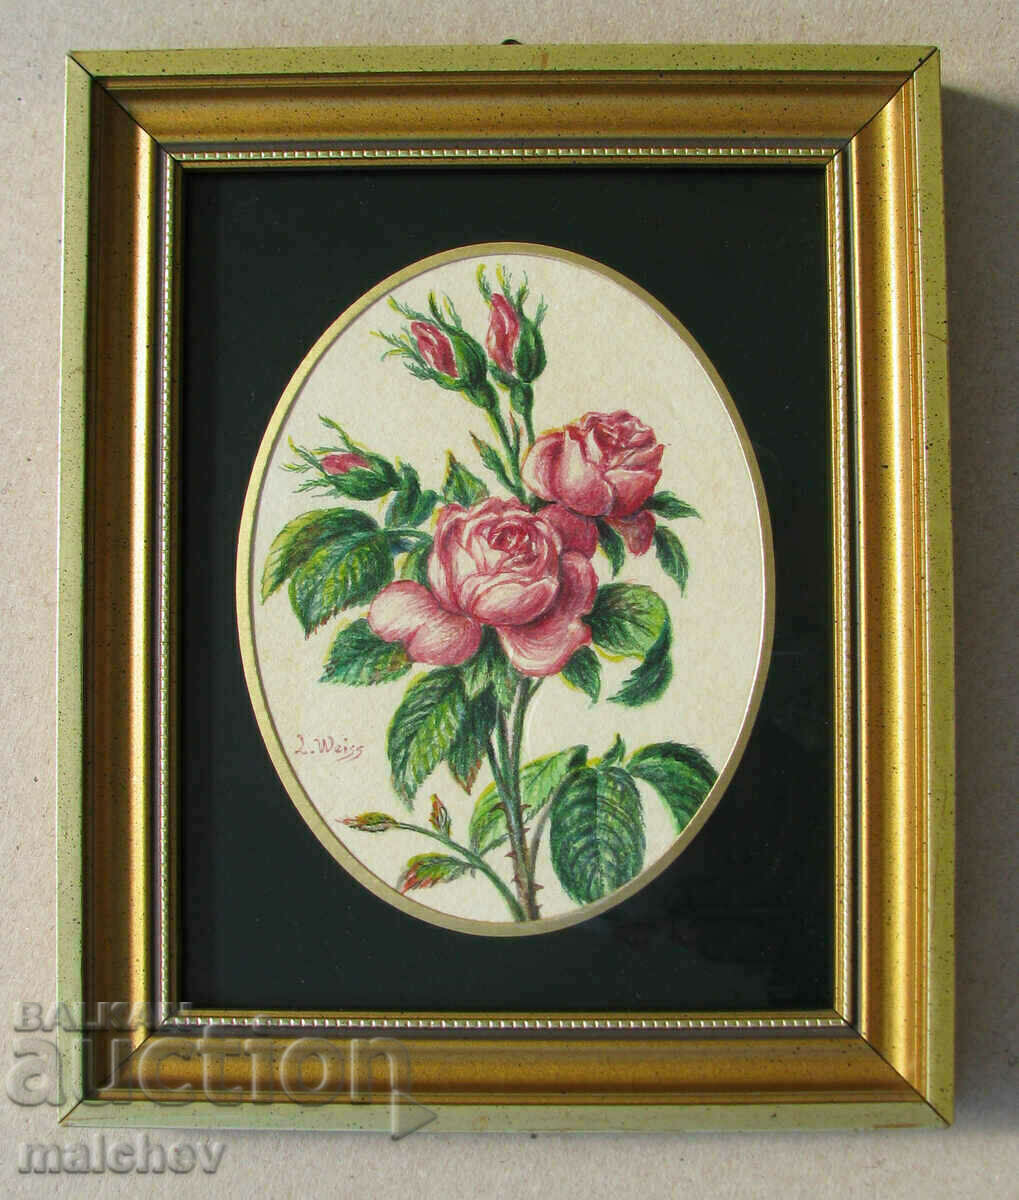 Watercolor painting Rose, L. Weiss, framed 16/19 cm, excellent